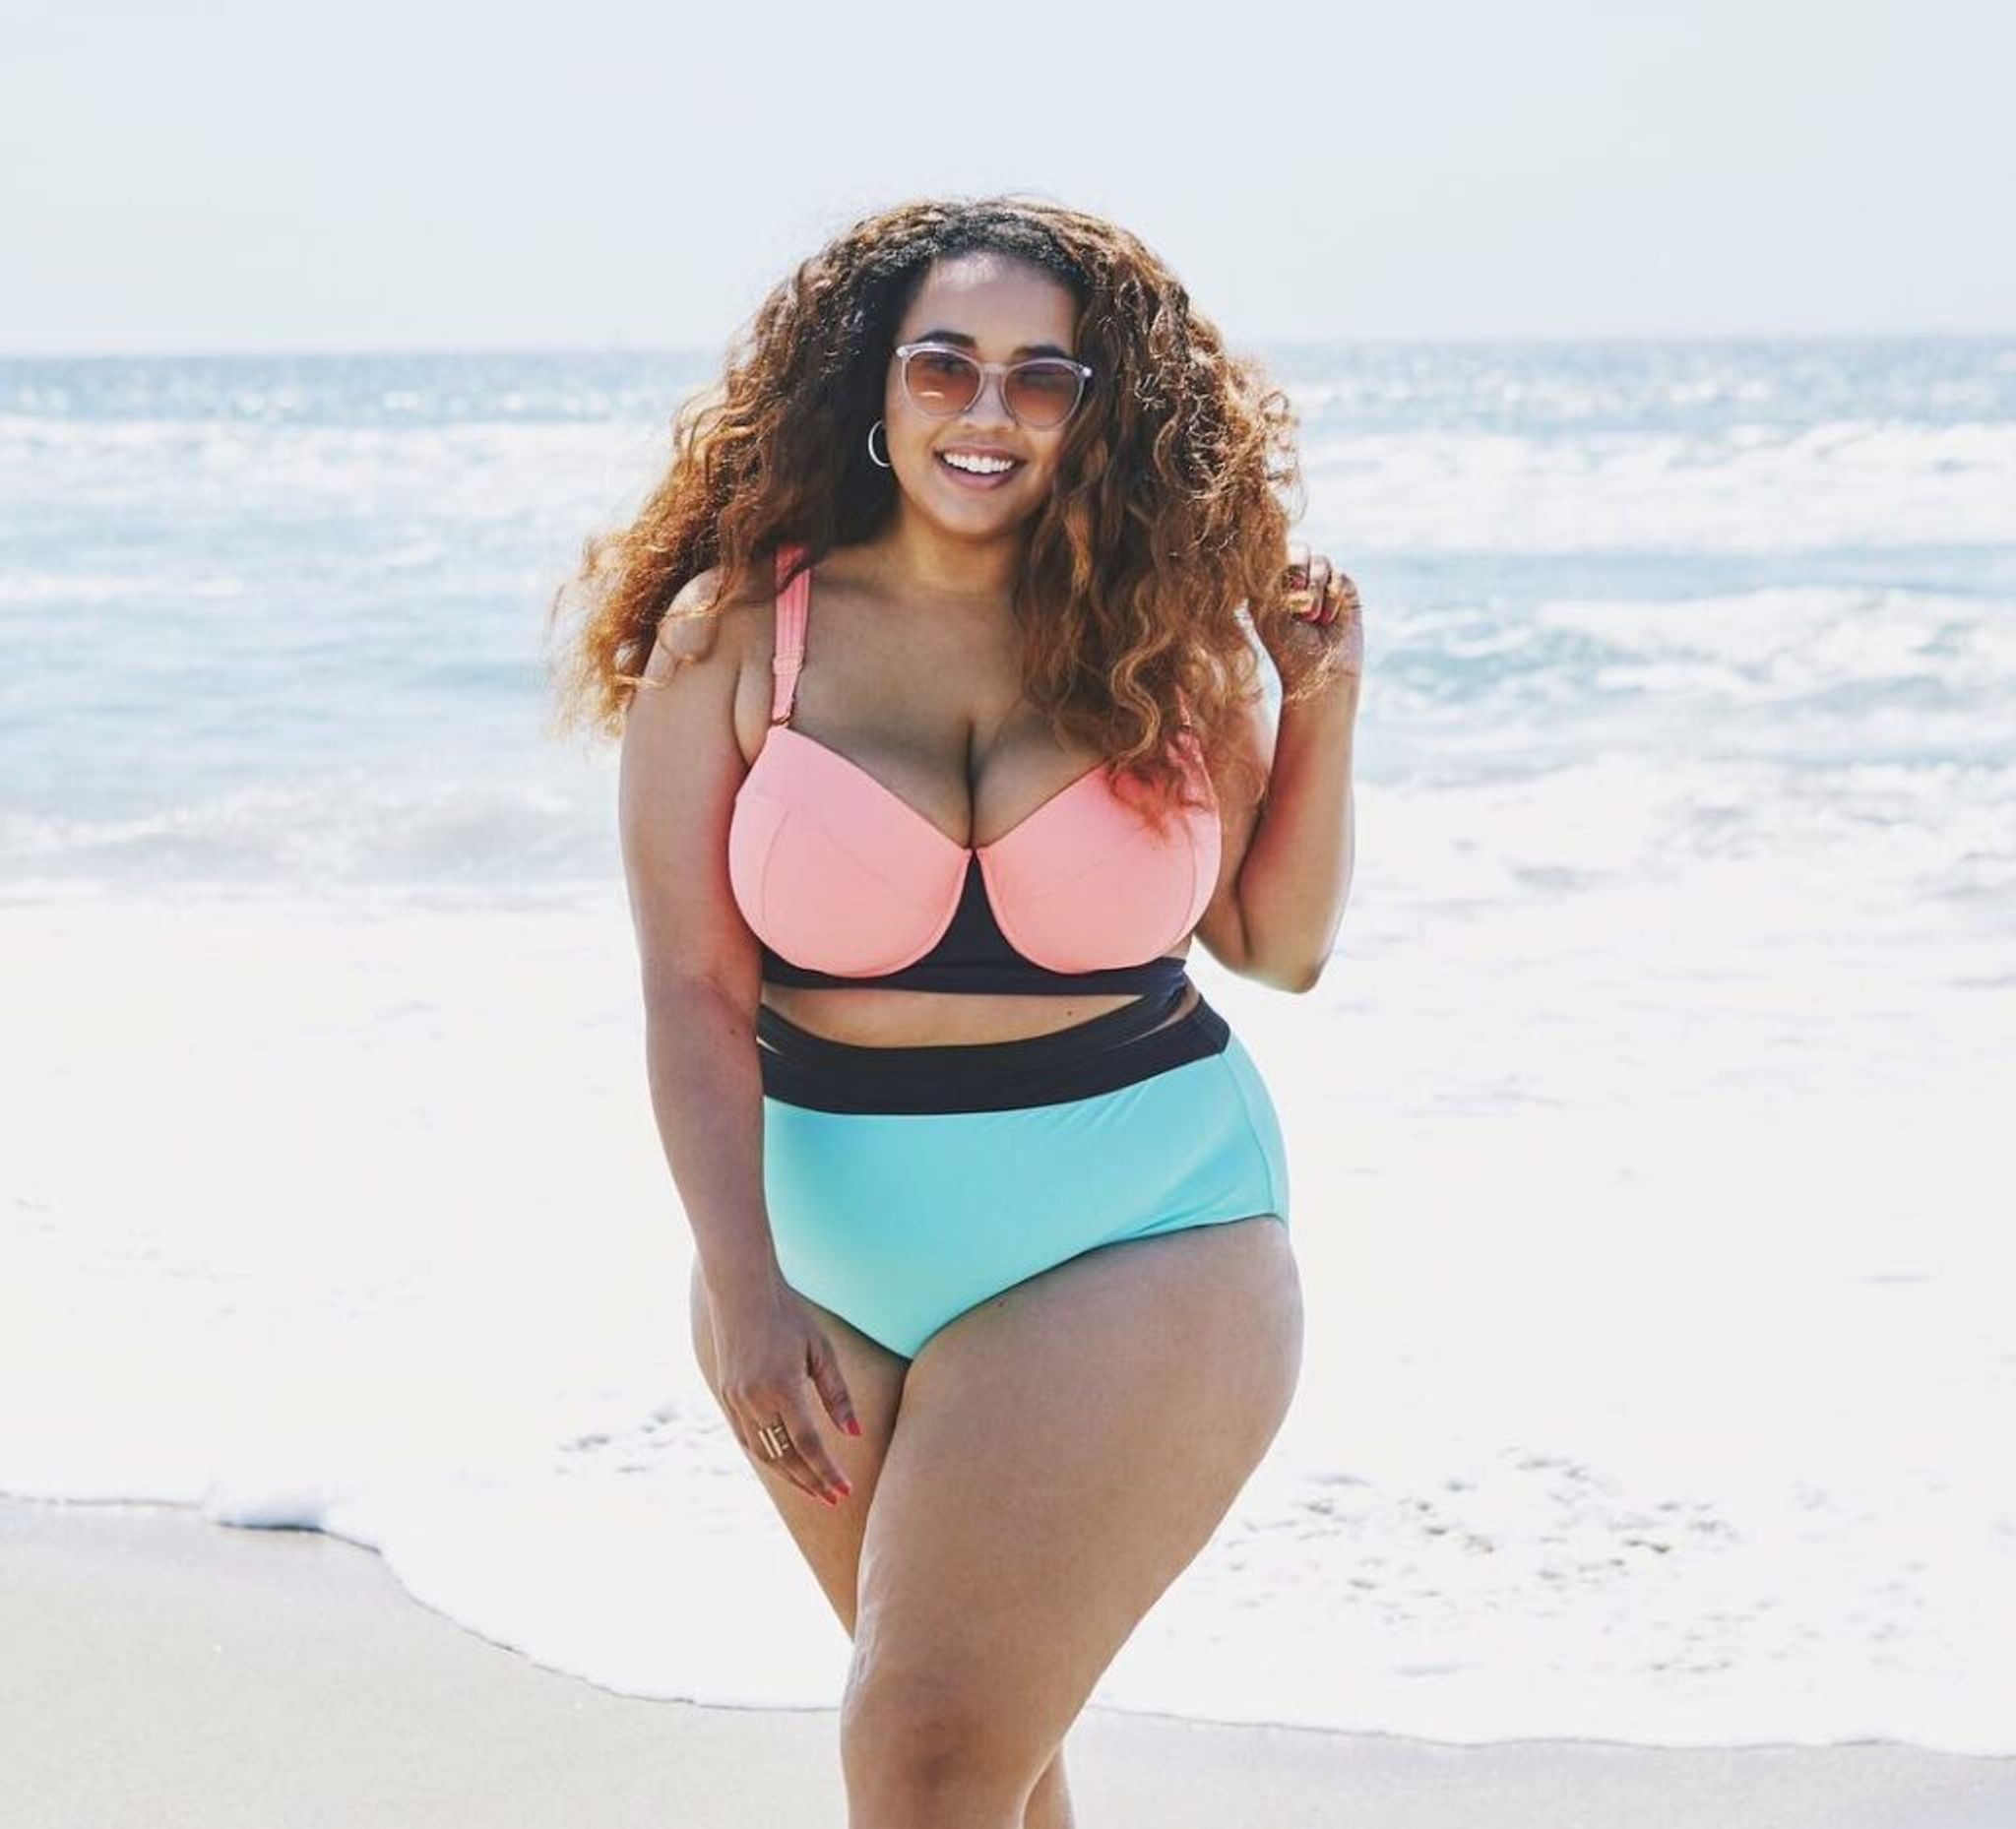 GABIFRESH Is Breaking The Stereotype When It Comes To Plus Size